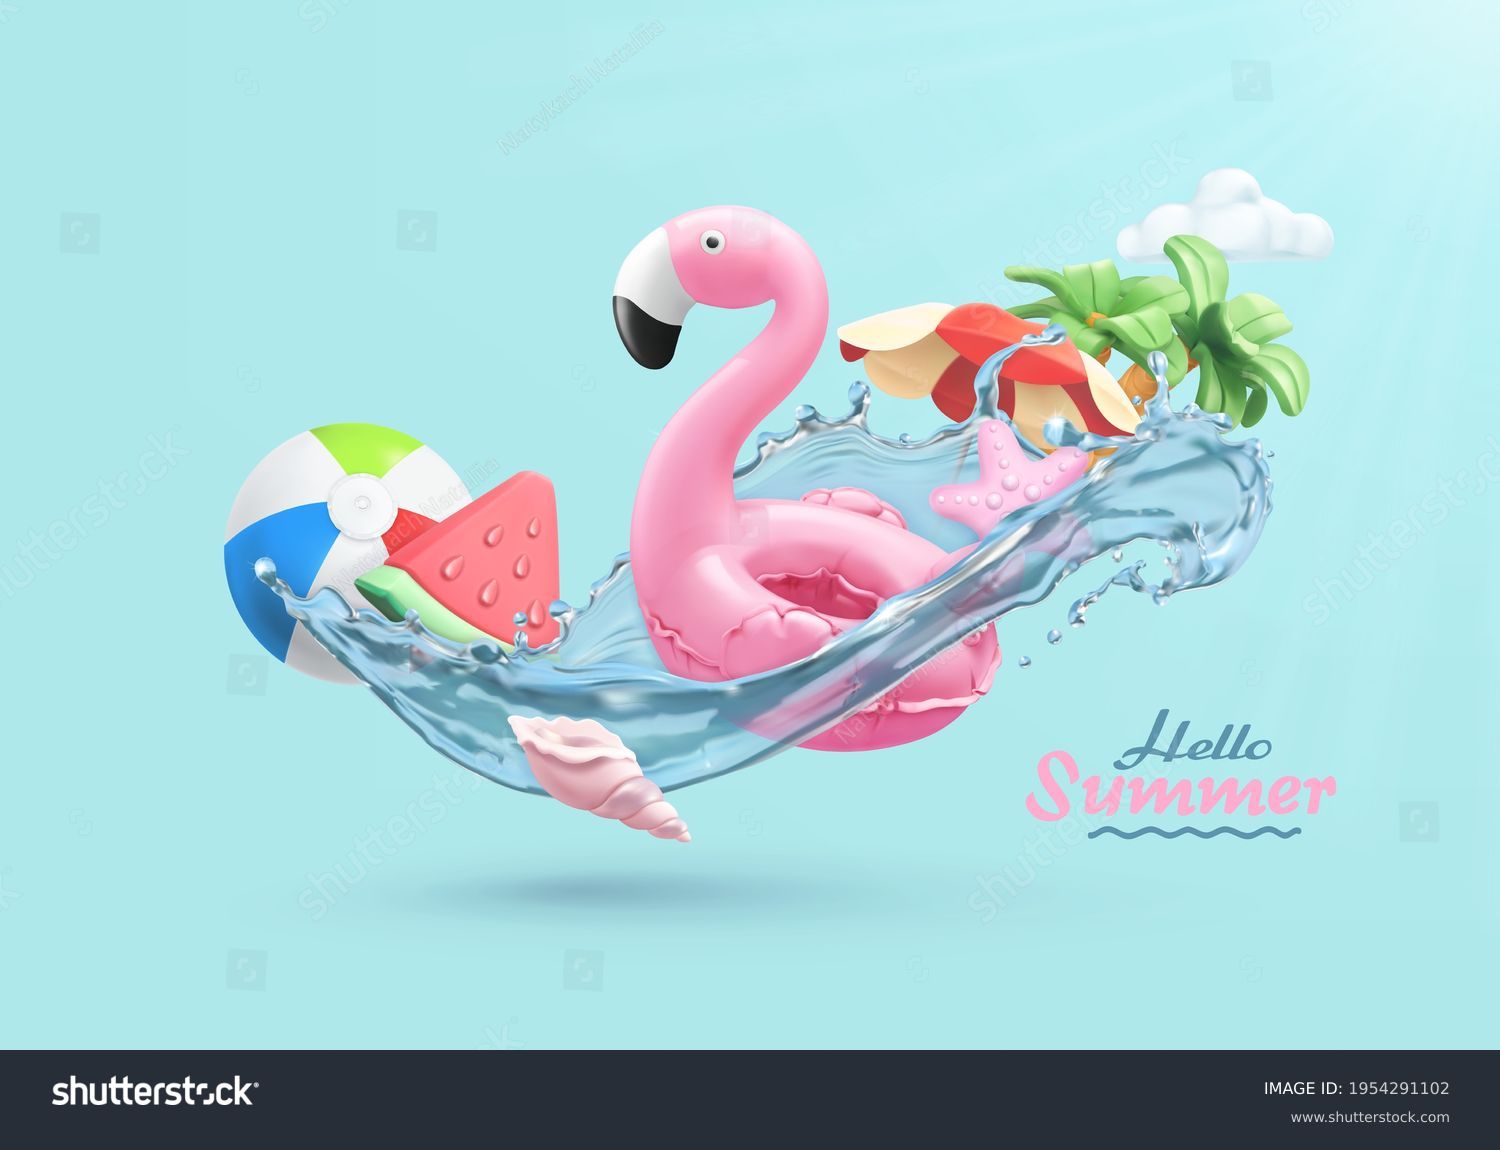 Summer festive background. 3d vector realistic illustration. Flamingo inflatable toy, watermelon, palm trees, shell, water splash #1954291102